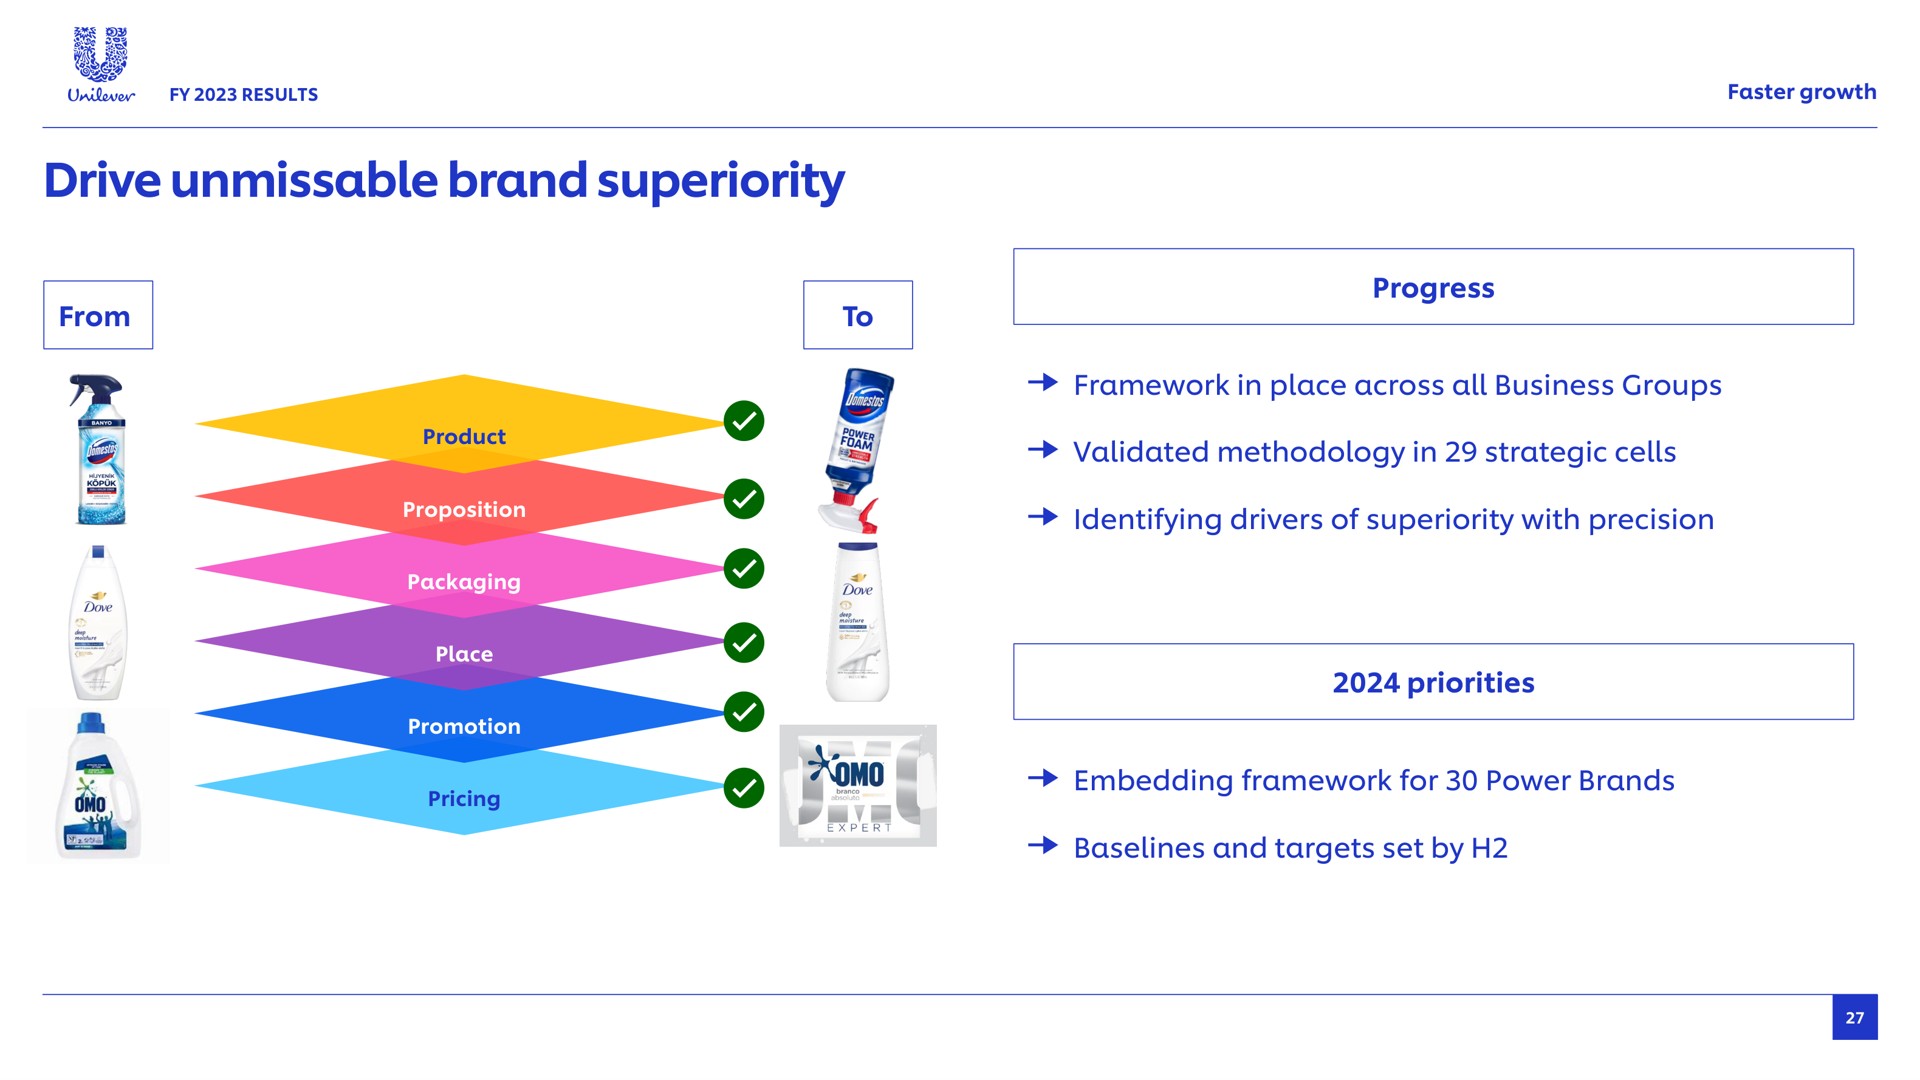 drive unmissable brand superiority results faster growth from to progress proposition packaging place promotion framework in place across all business groups validated methodology in strategic cells identifying drivers of with precision priorities embedding framework for power brands and targets set by | Unilever